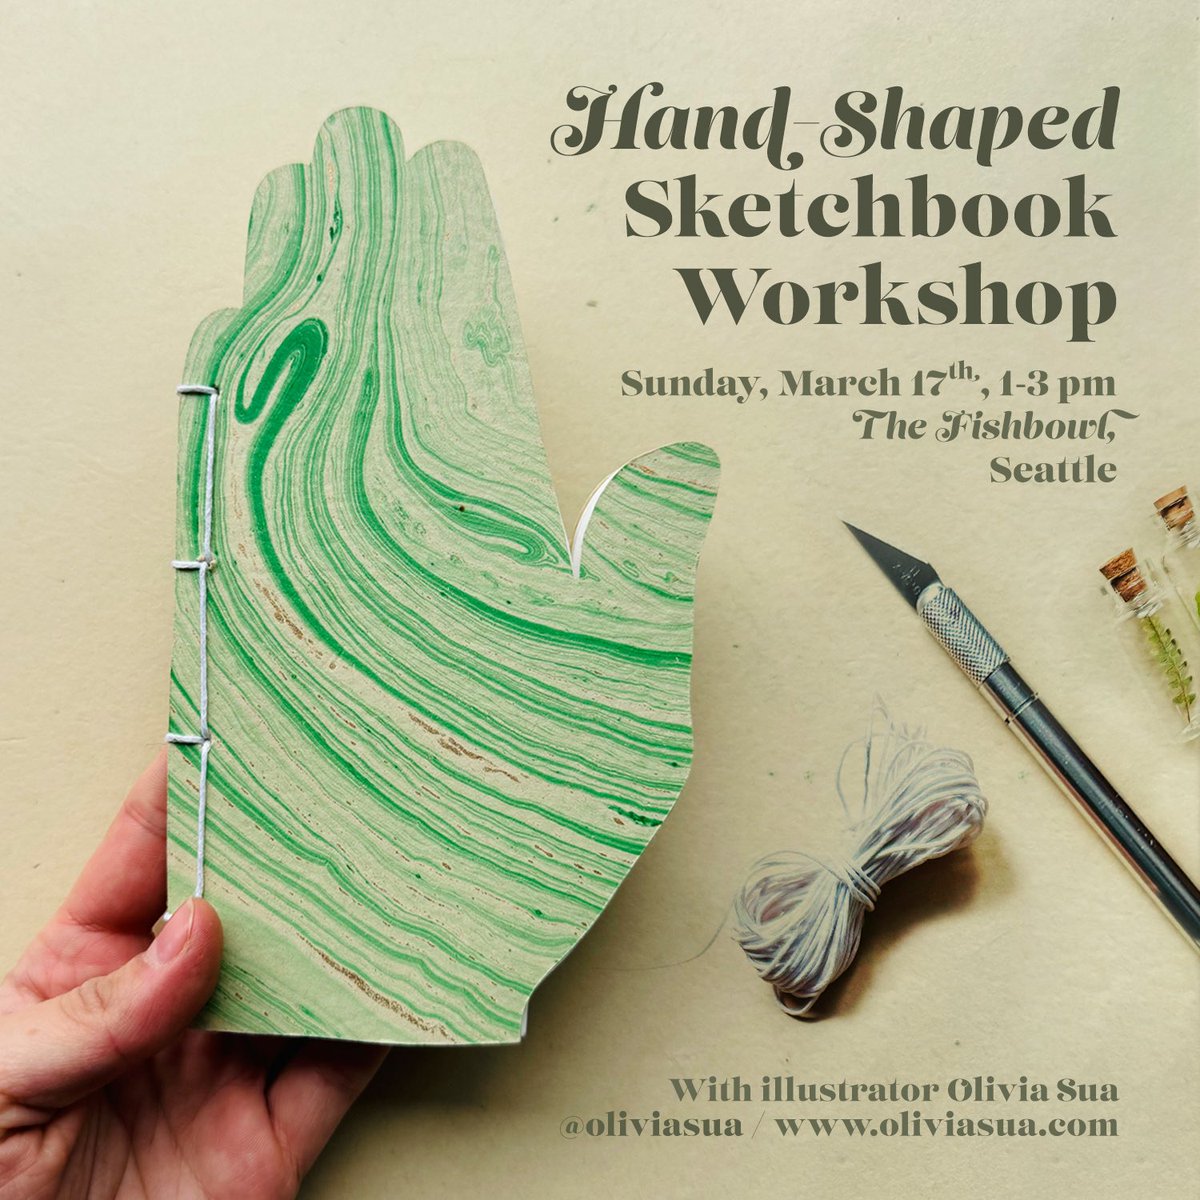 Hand-Shaped Sketchbook Workout March 17th, 1-3pm at The Fishbowl Activity is $20, supplies included! thefishbowlseattle.com/shop/p/62y2twj… #seattle #seattleevents